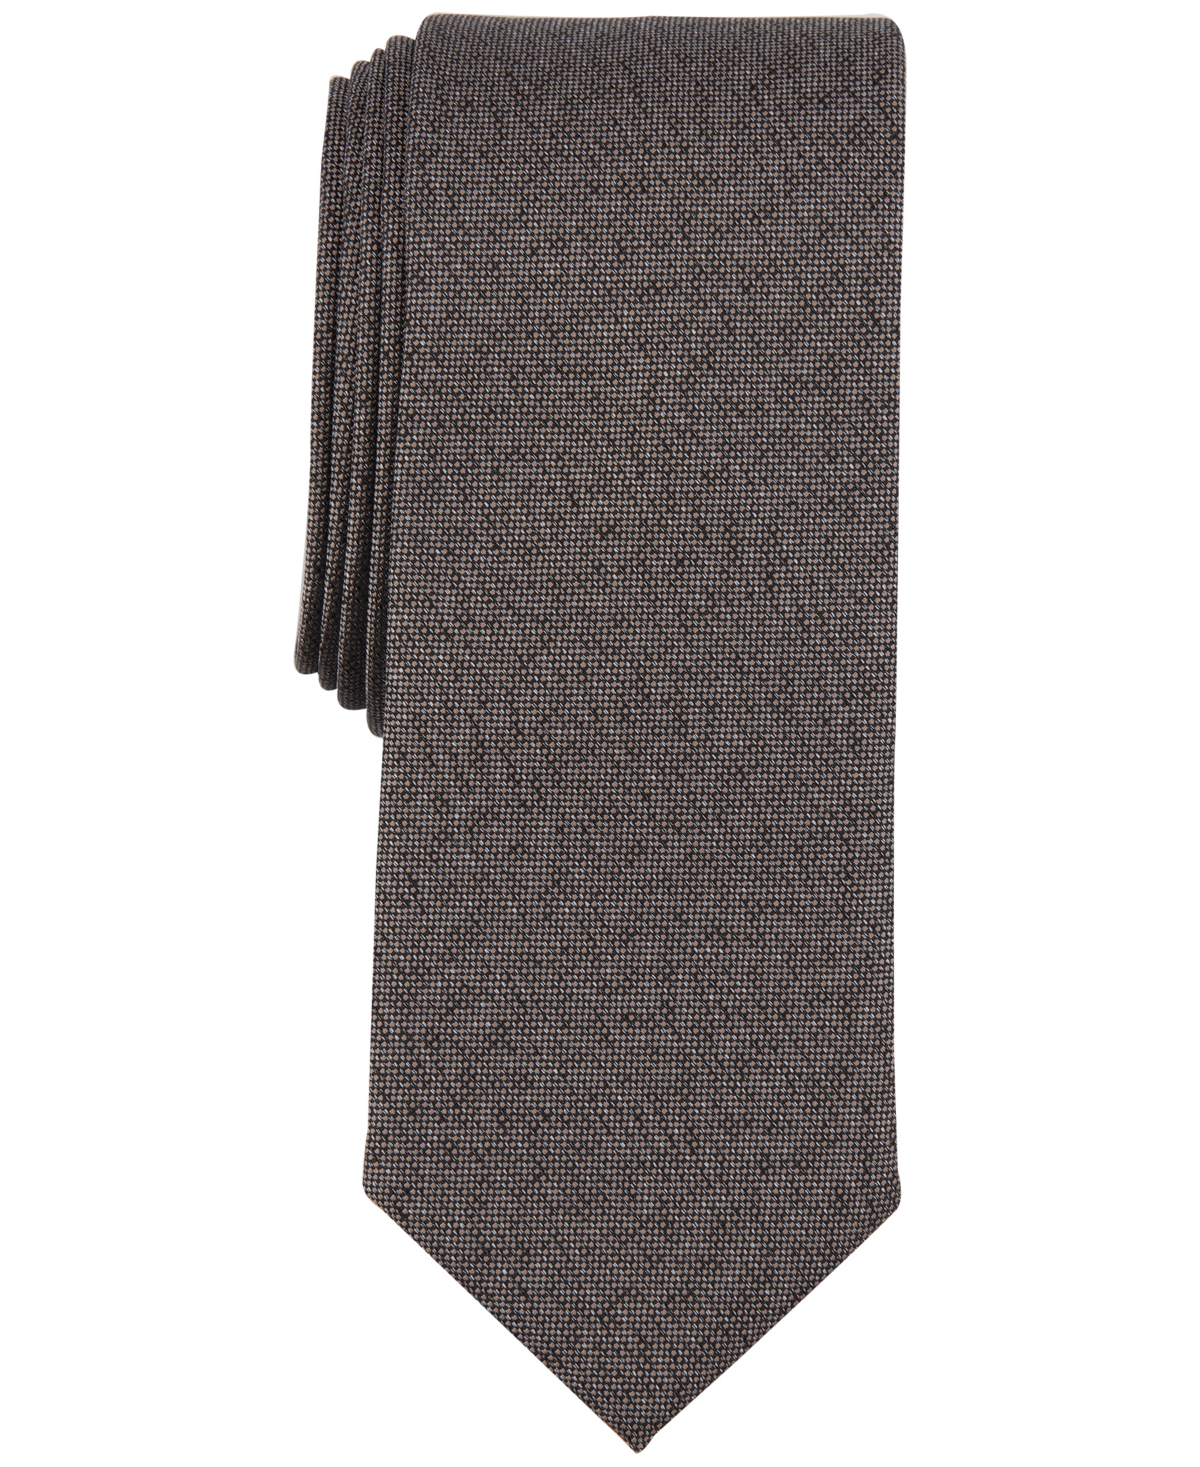 Men's Cobbled Solid Tie, Created for Macy's - Taupe